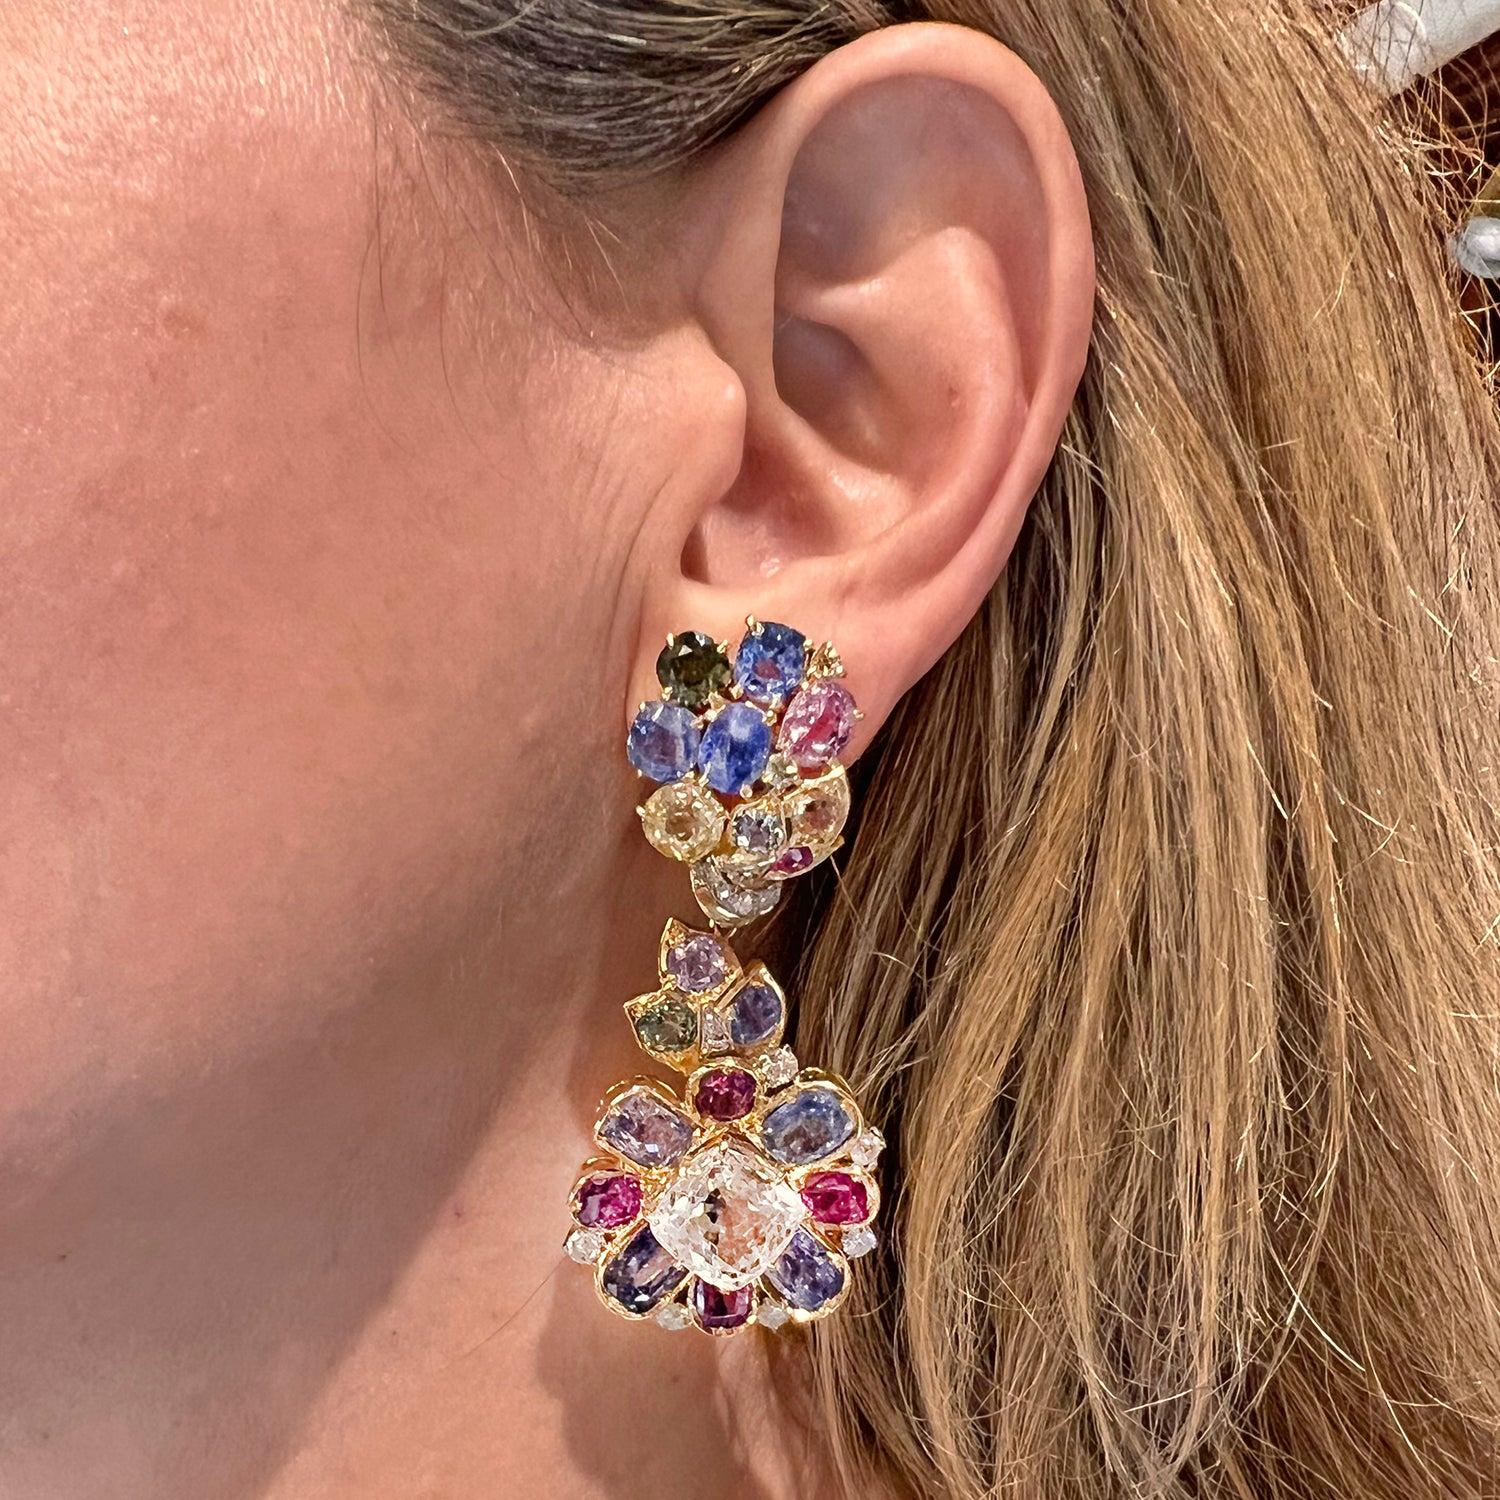 Beautiful multicolored sapphire drop earrings, featuring various-shaped faceted natural and unheated sapphires (pink, purple, blue, yellow, green and white hues), accented by round brilliant-cut diamonds. Handmade in 18k yellow gold. Drops are